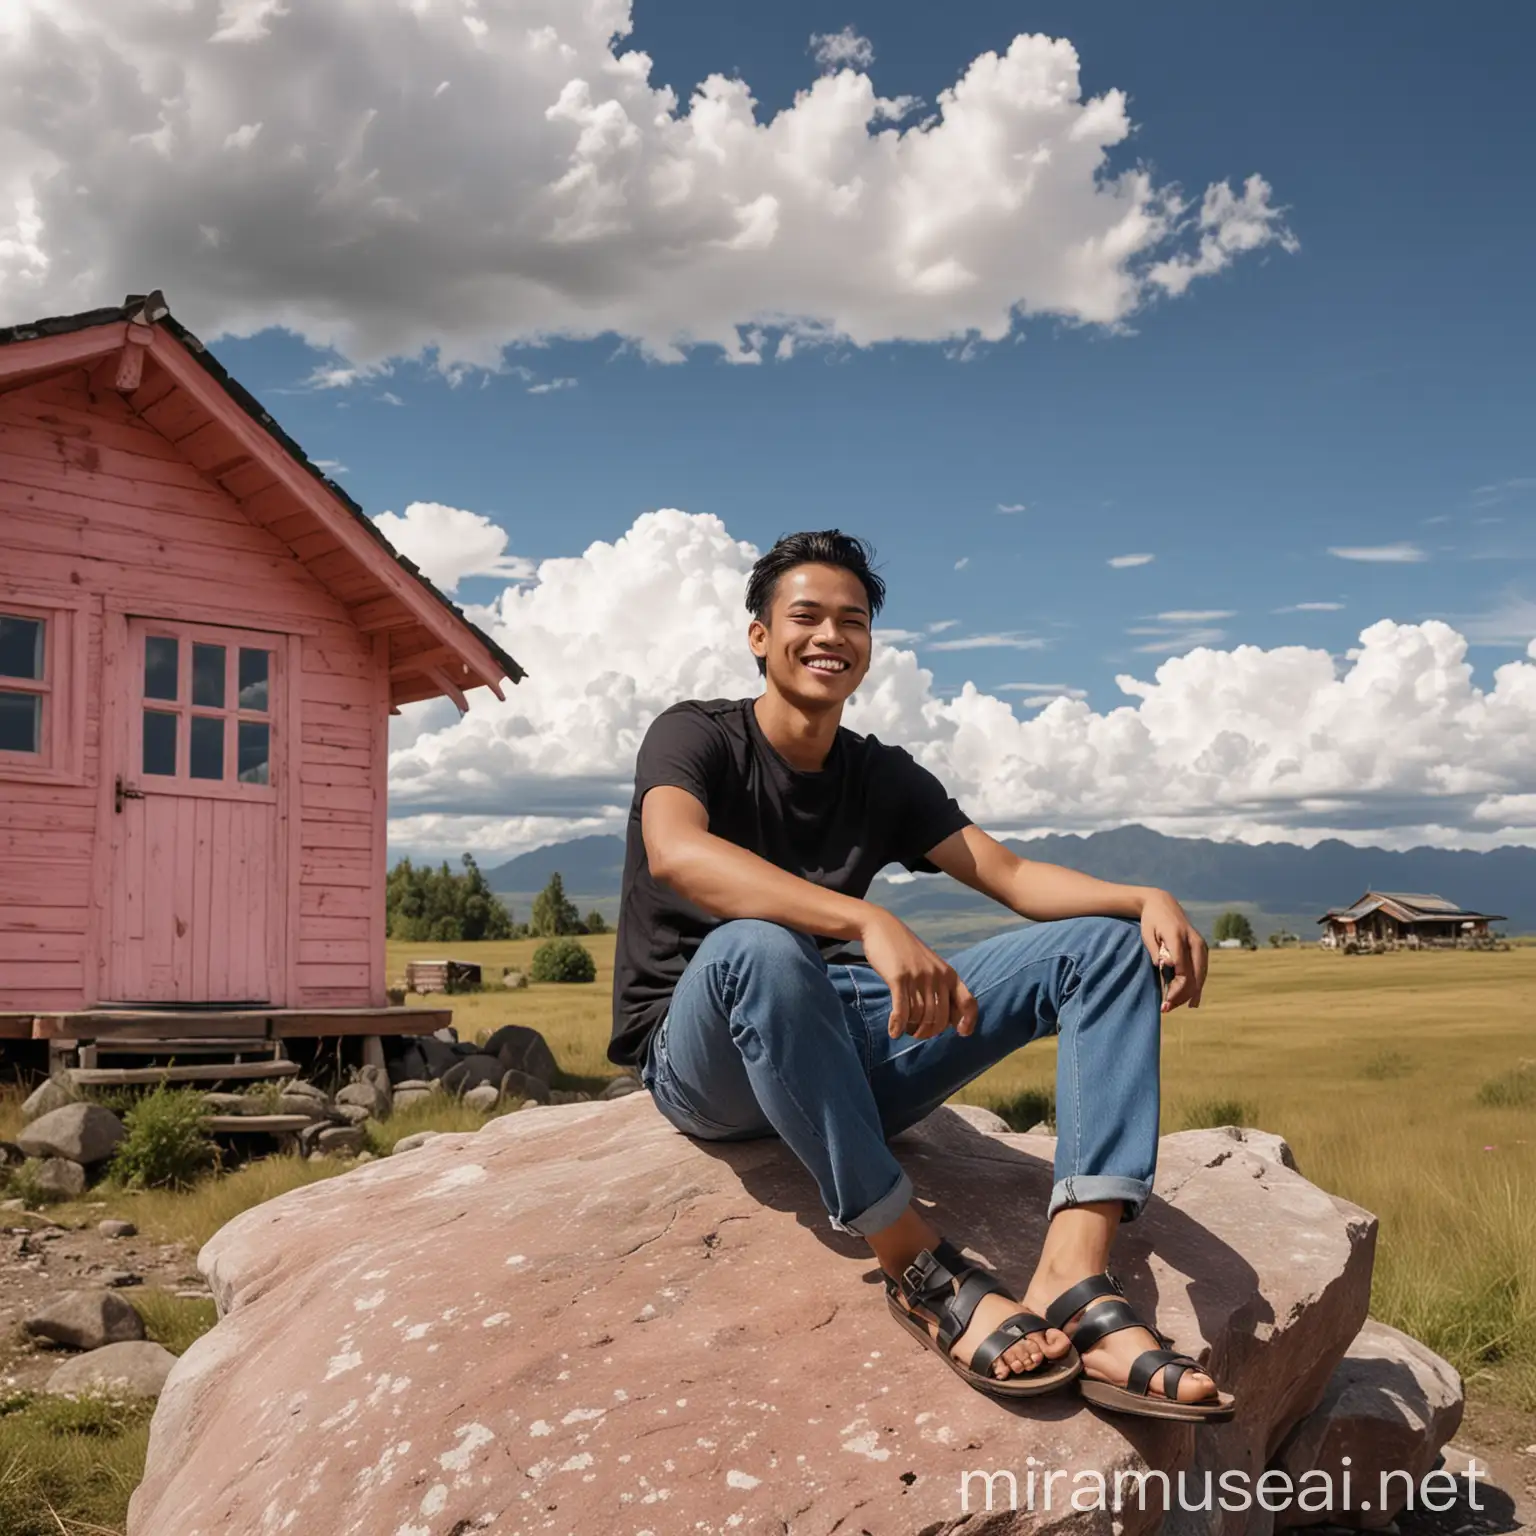 Young Indonesian Man Smiling on Rock with Cloudy Sky and Pink Cabin